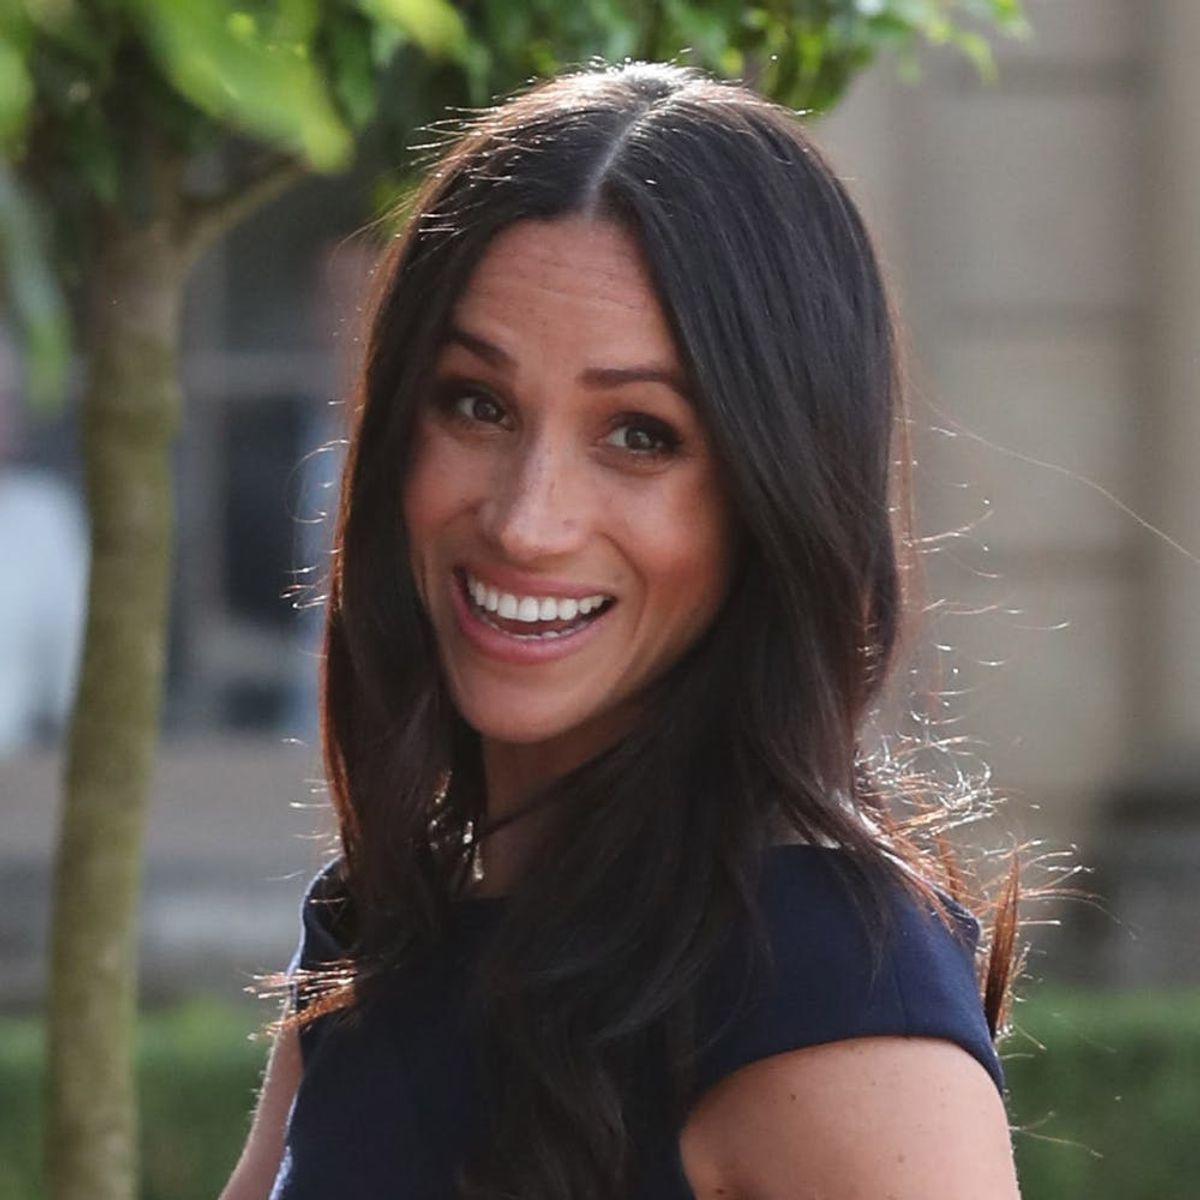 See Meghan Markle With Her Mom on the Eve of the Royal Wedding